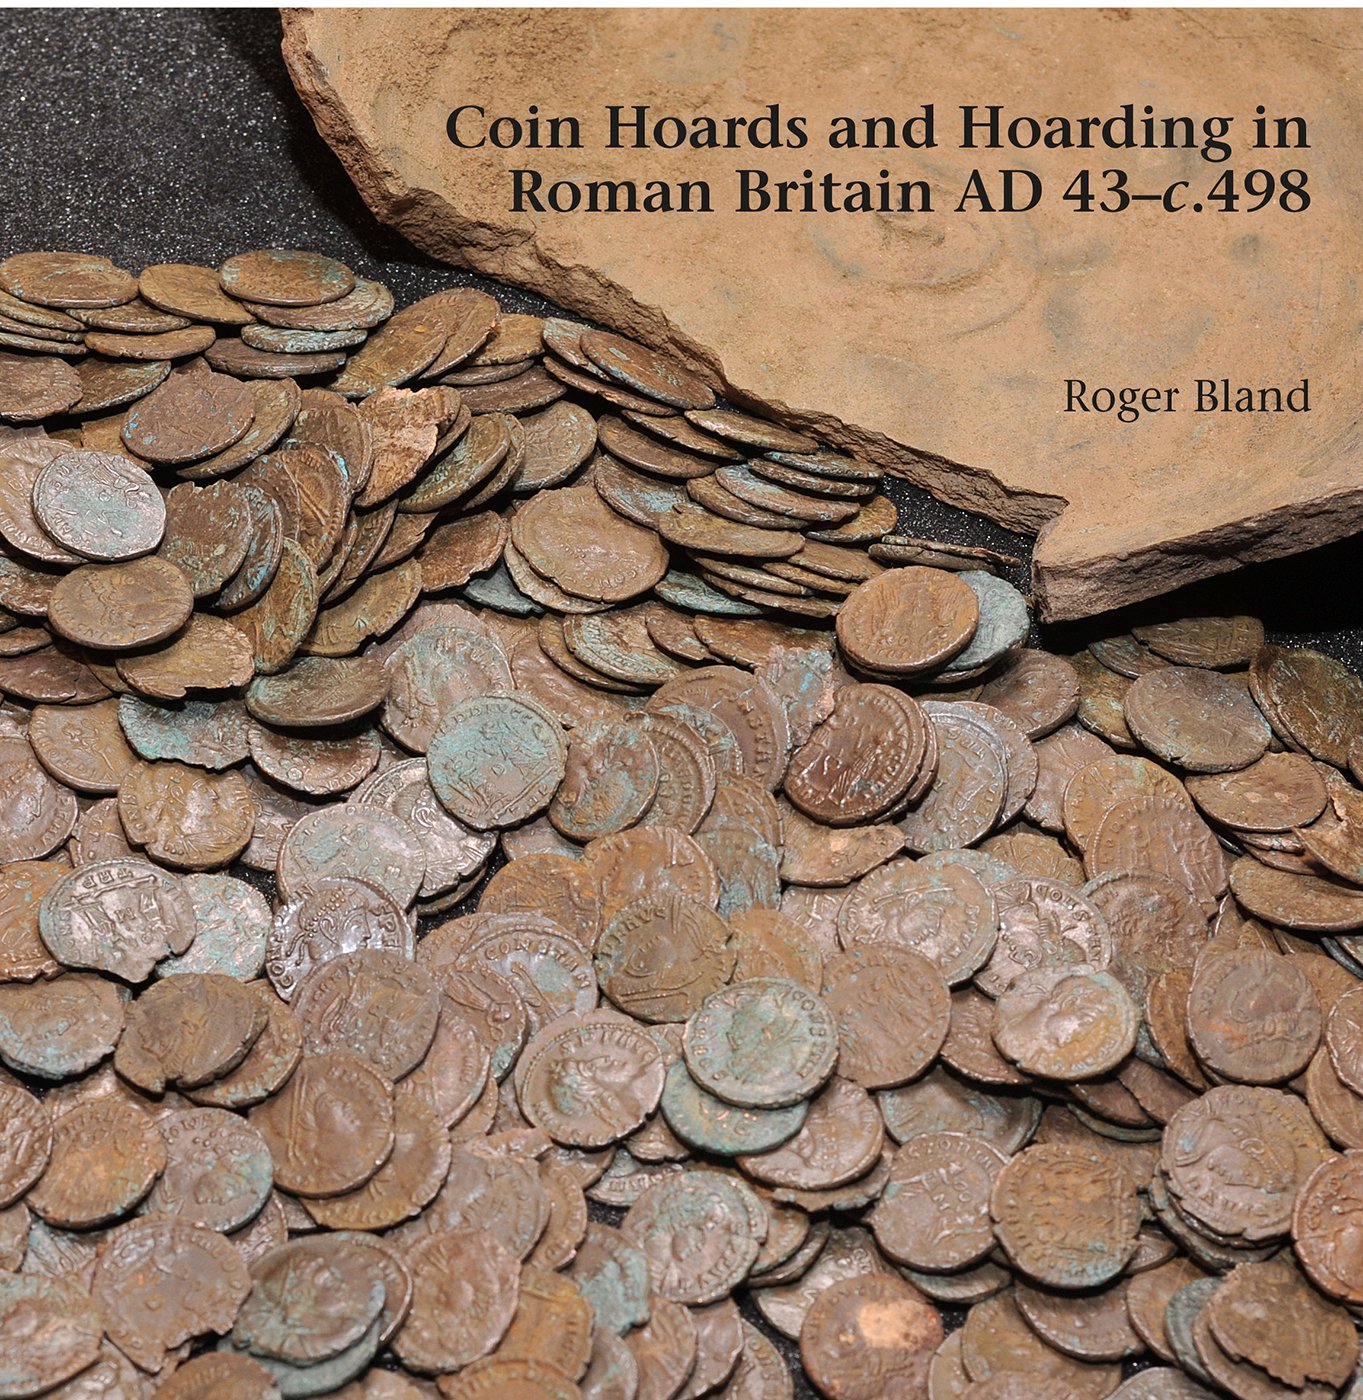 Coin Hoards and Hoarding in Roman Britain ad 43 - c498, 2018, 424 p.